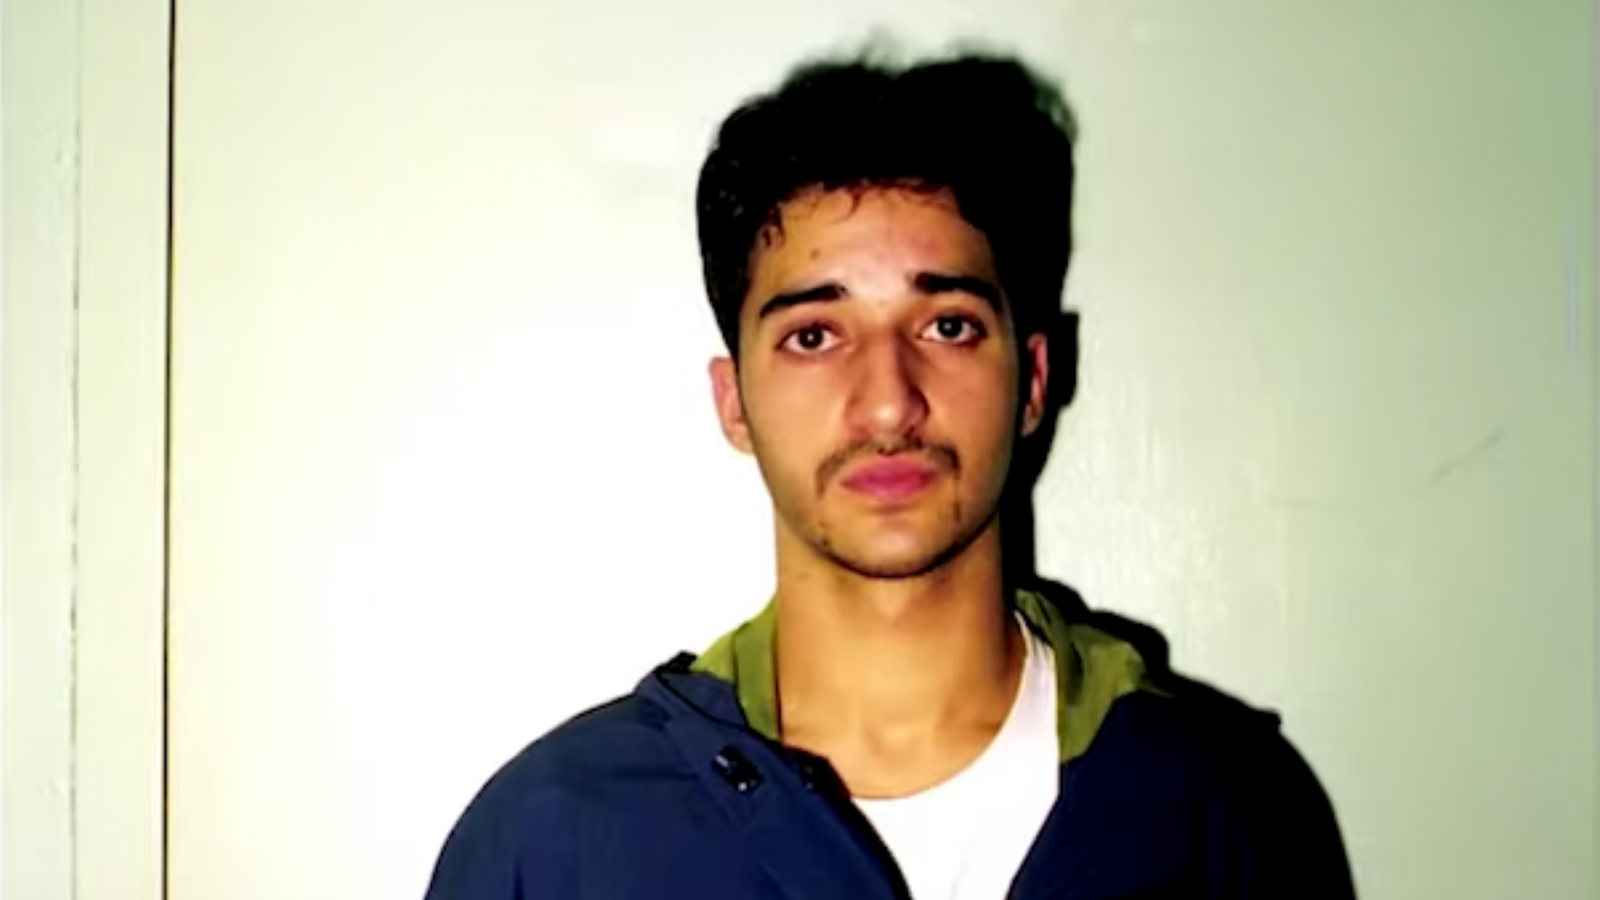 serial-subject-adnan-syed-will-get-new-dna-tests-in-murder-case-gossipchimp-trending-k